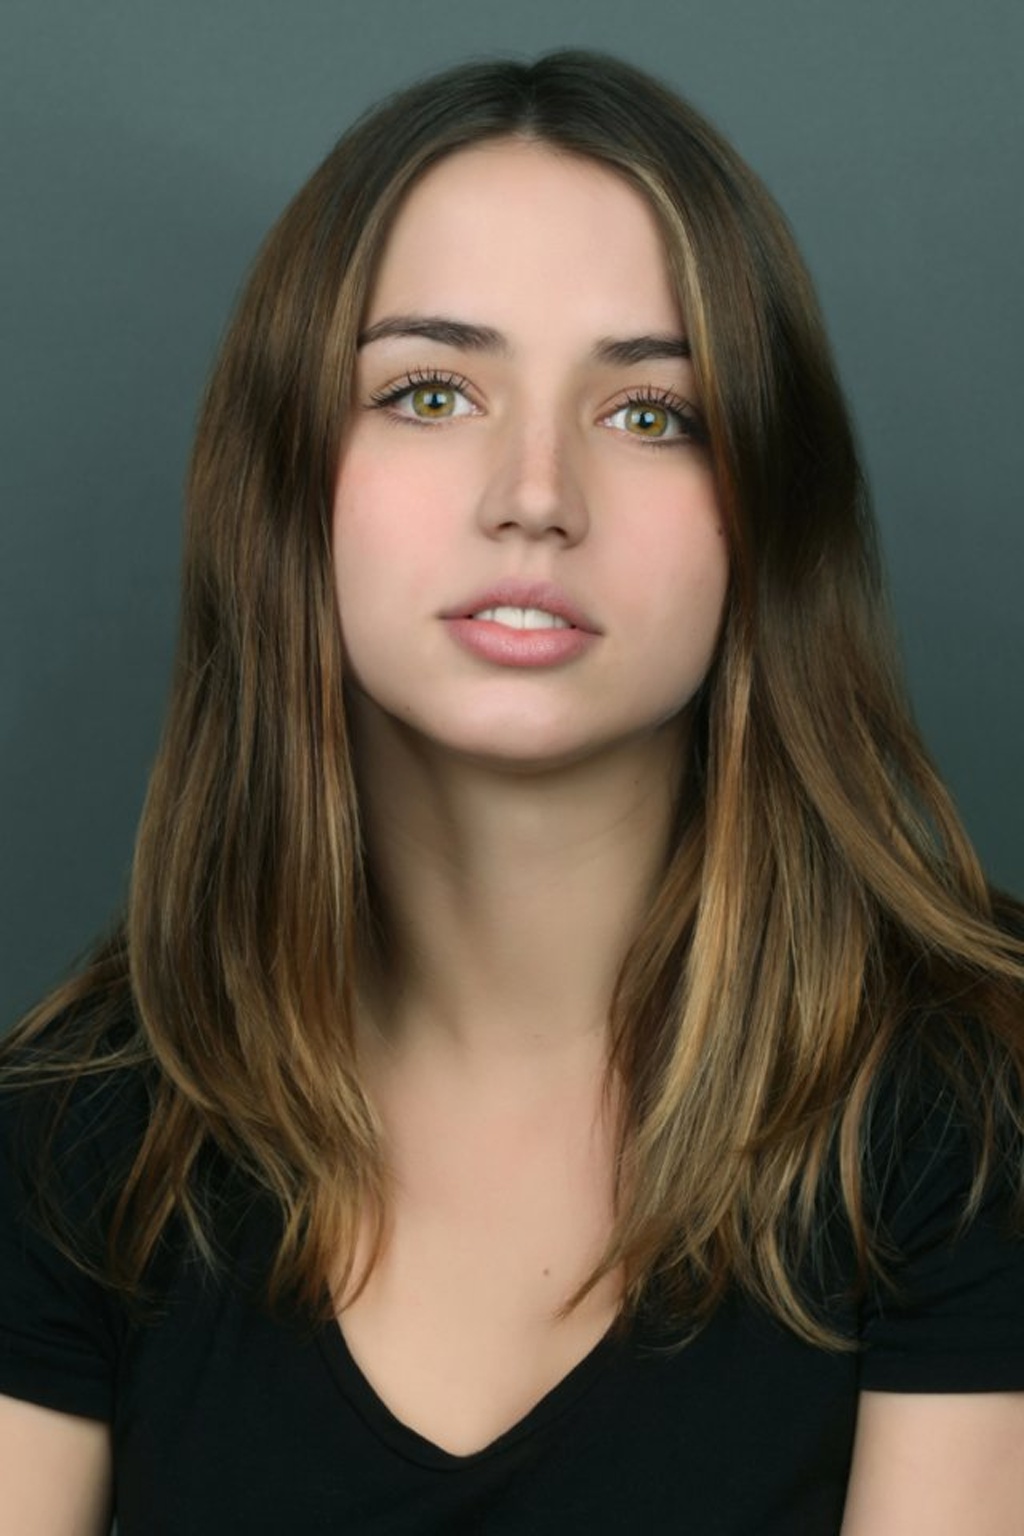 Ana De Armas HD Wallpapers Free Download in High Quality and Resolution